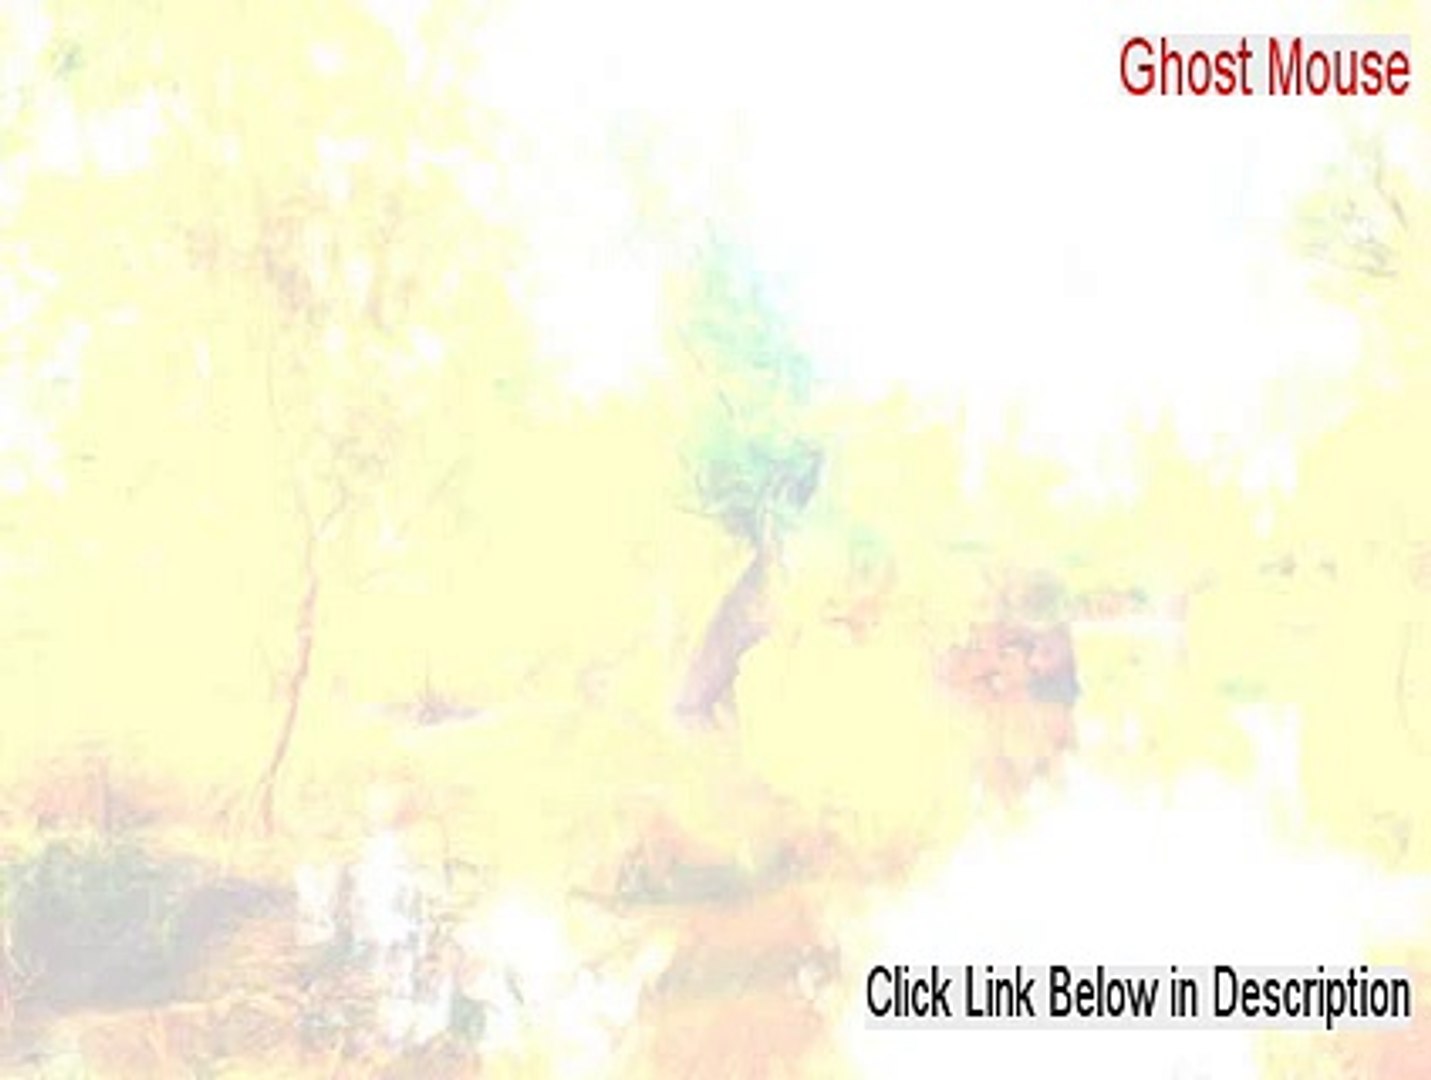 Ghost Mouse Cracked (ghost mouse 2.0 2015) - video Dailymotion